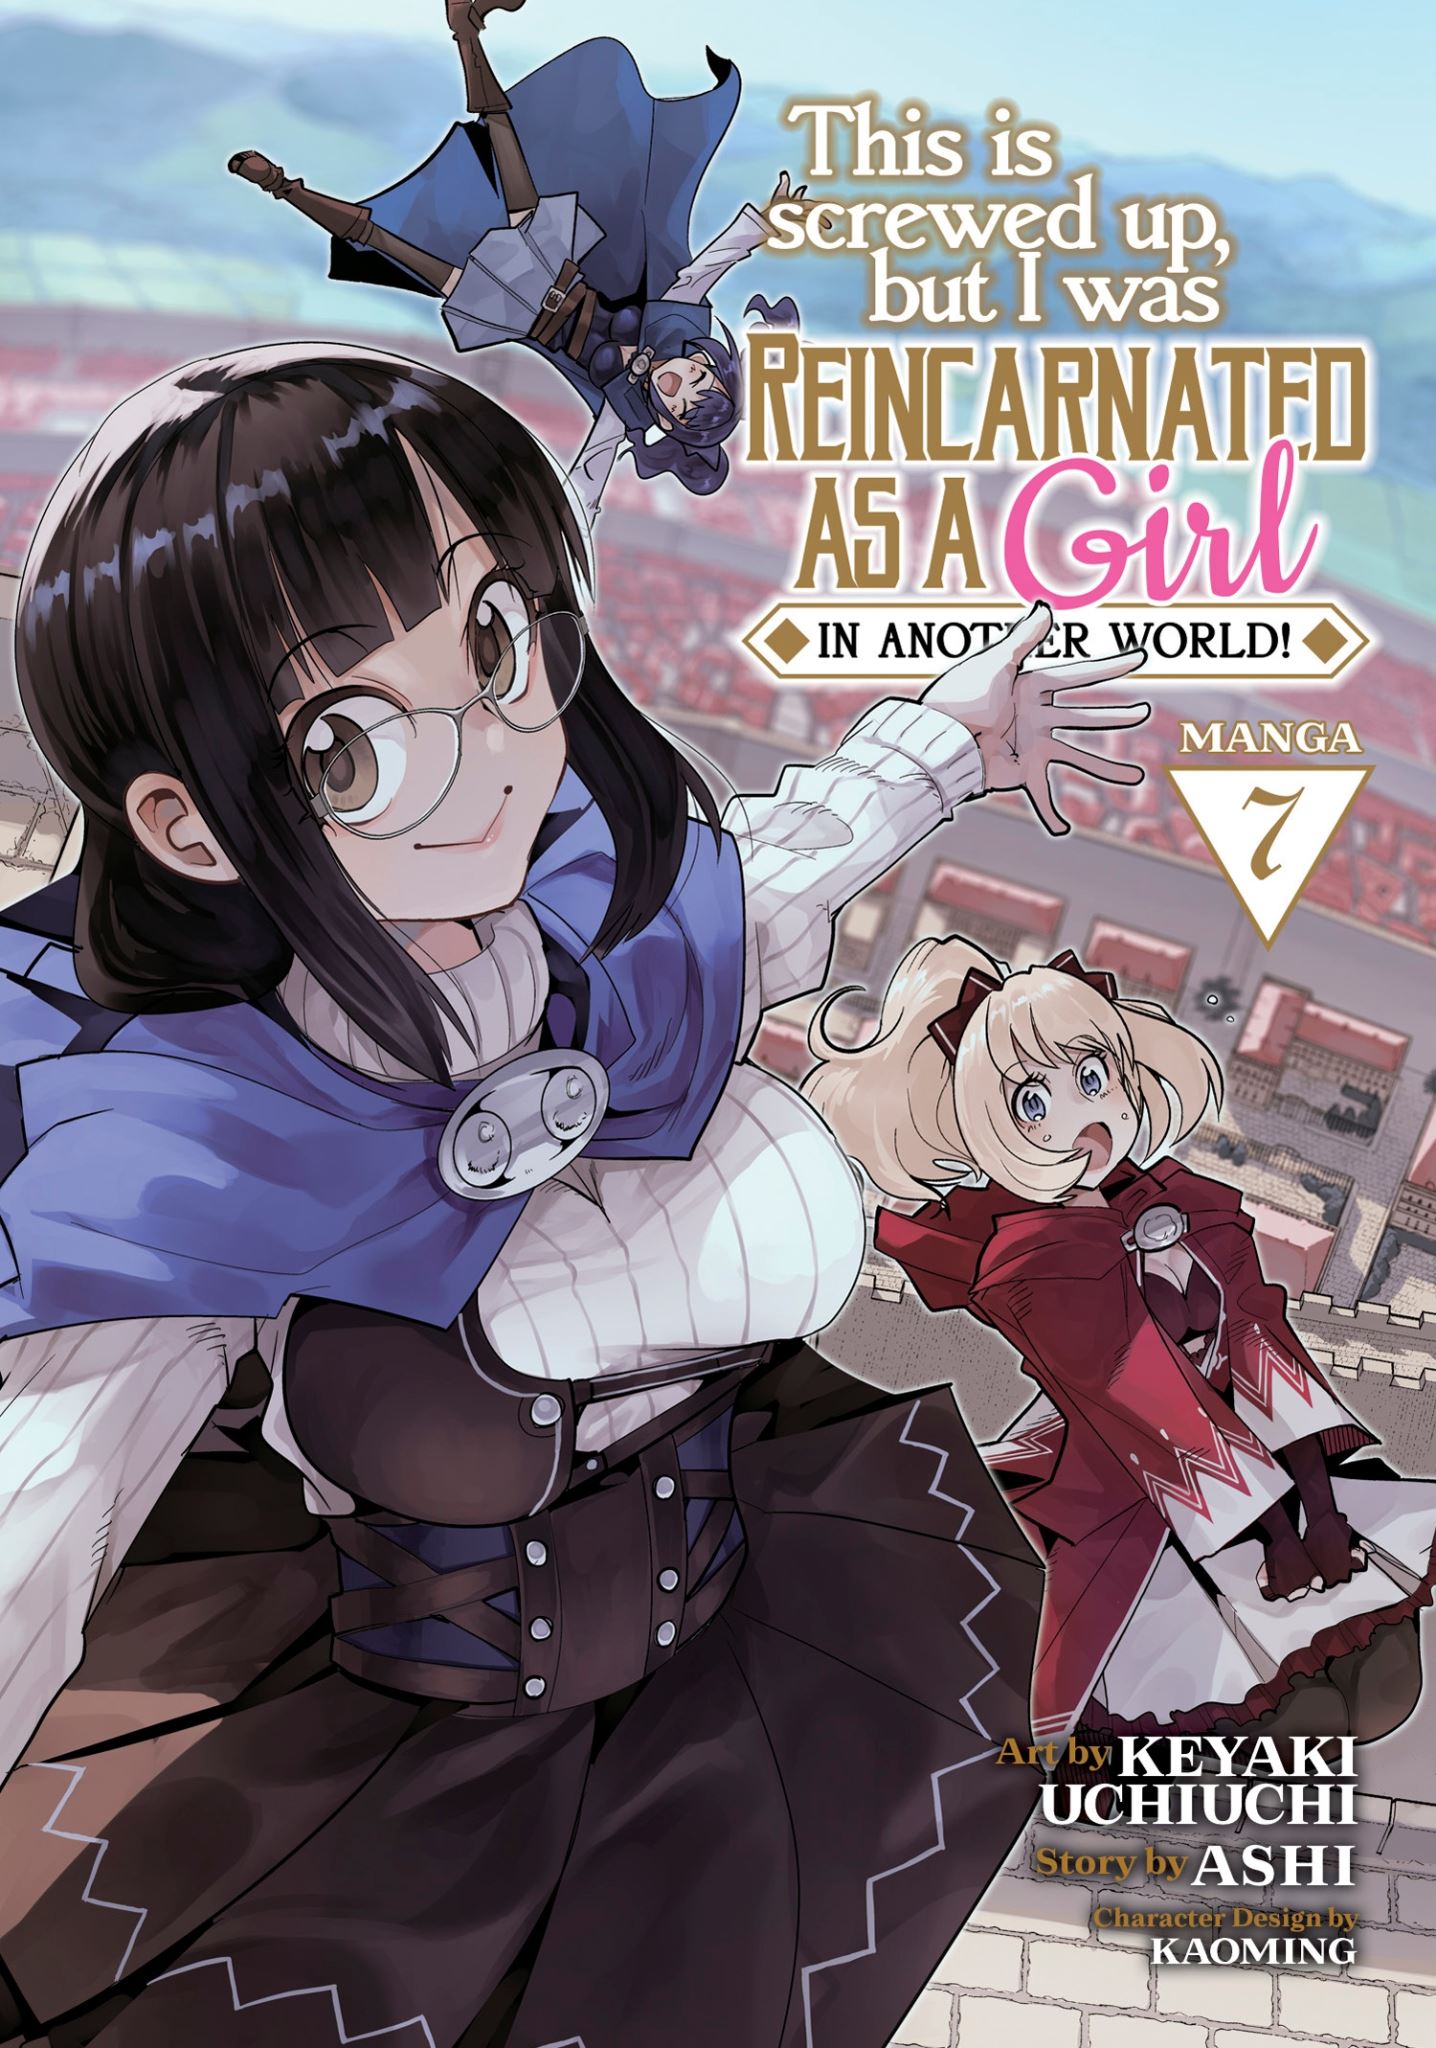 This Is Screwed Up, but I Was Reincarnated as a GIRL in Another World! (Manga) V